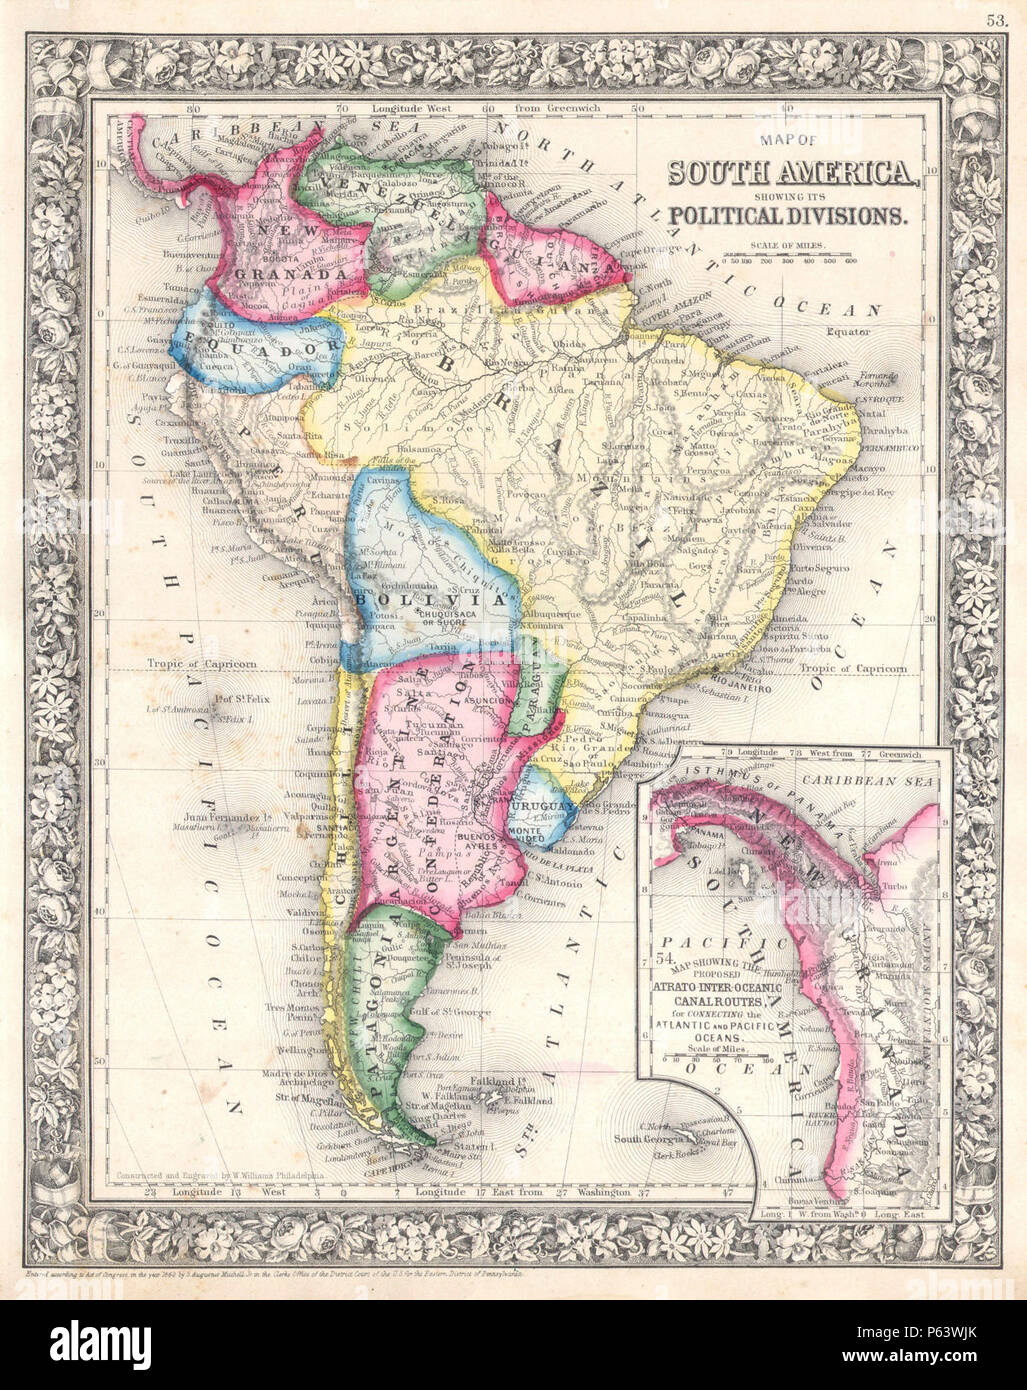 1864 Mitchell Map of South America - Geographicus - SouthAmerica-mitchell-1864. Stock Photo